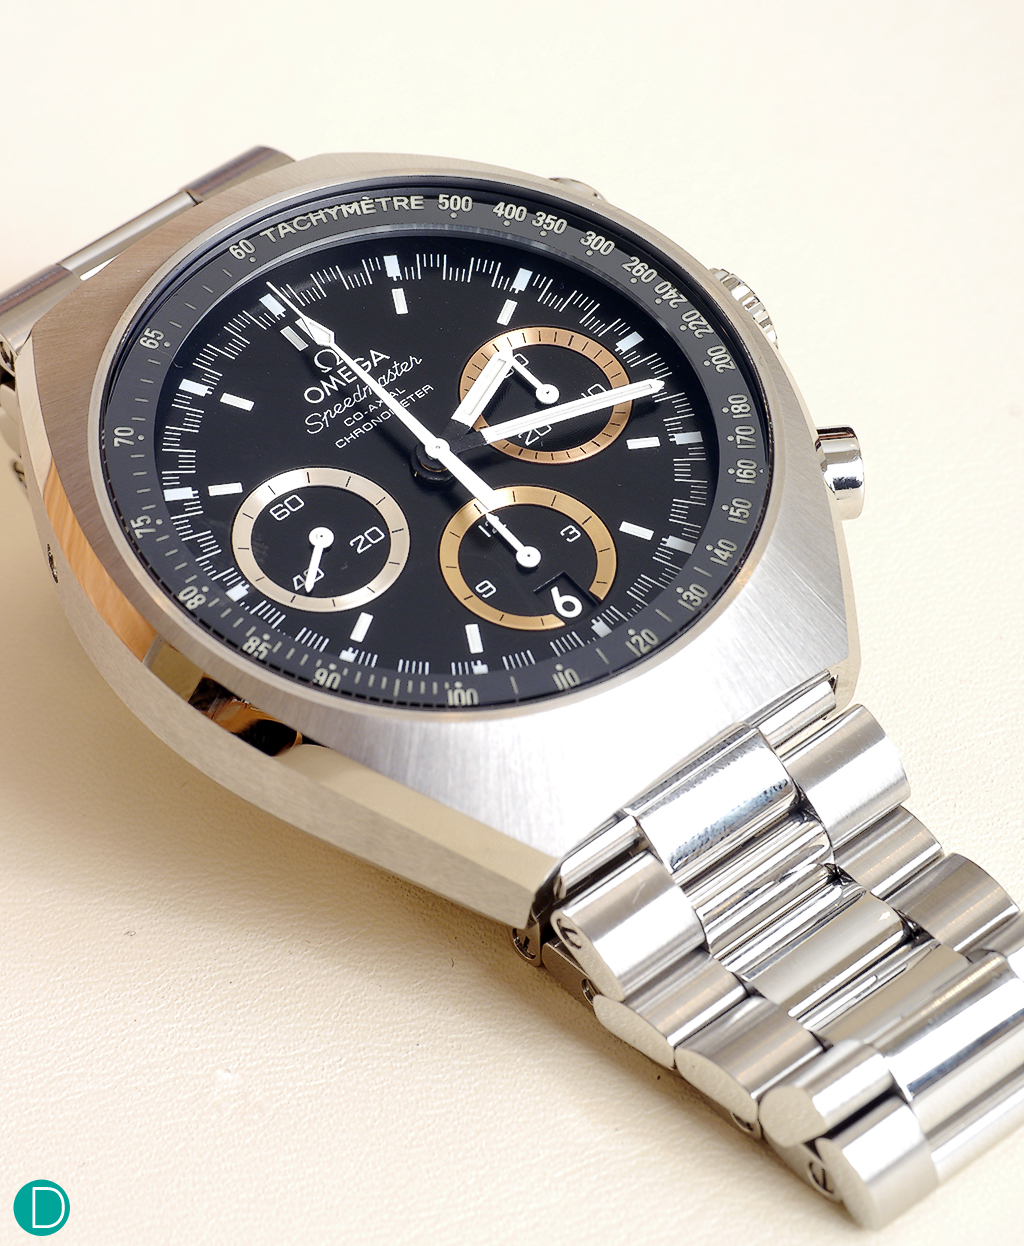 Would you have chosen the original or the relaunched Speedmaster Mark II?